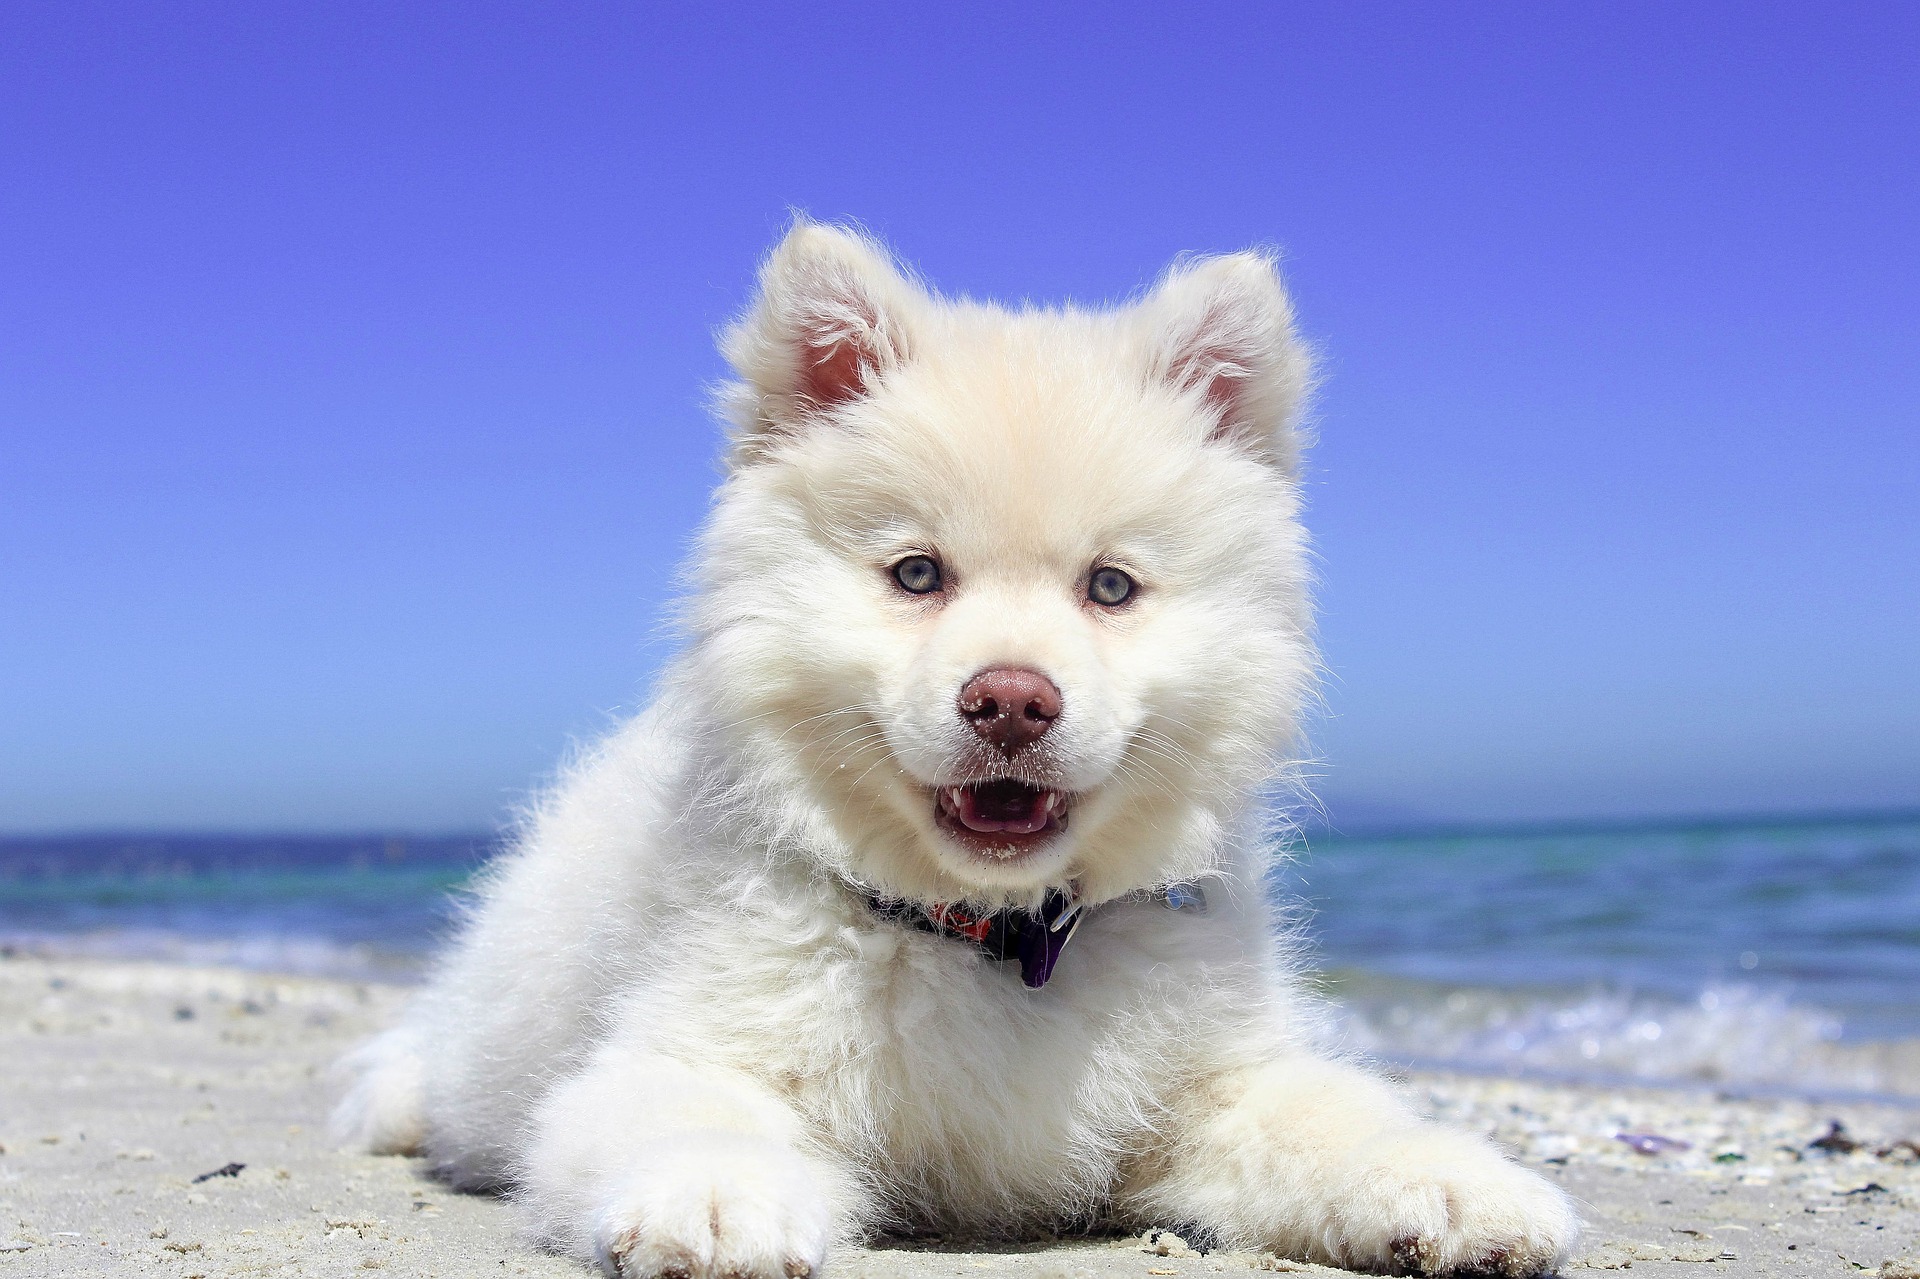 Puppy with white fur at the beach